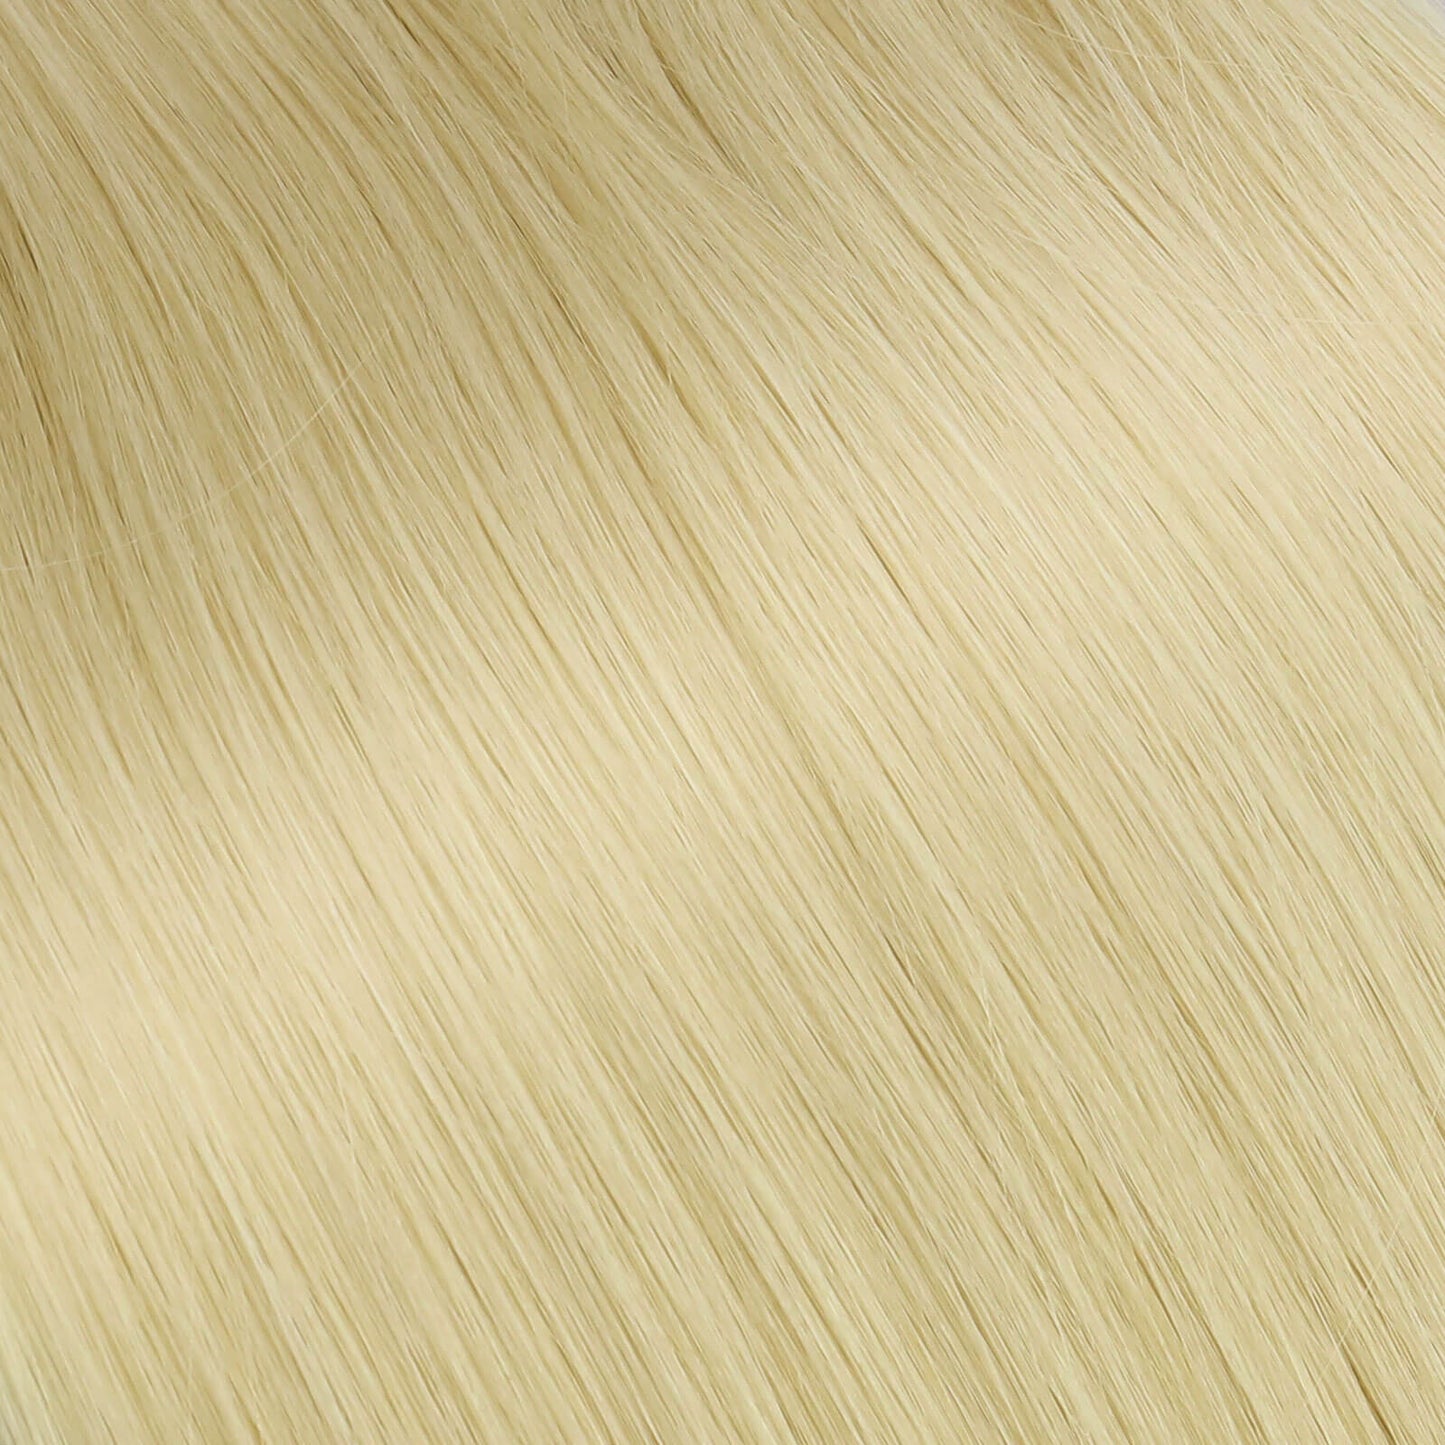 Customize Virgin Human Hair Extensions Cuticle Aligned Hair Bleach Blonde Color #613